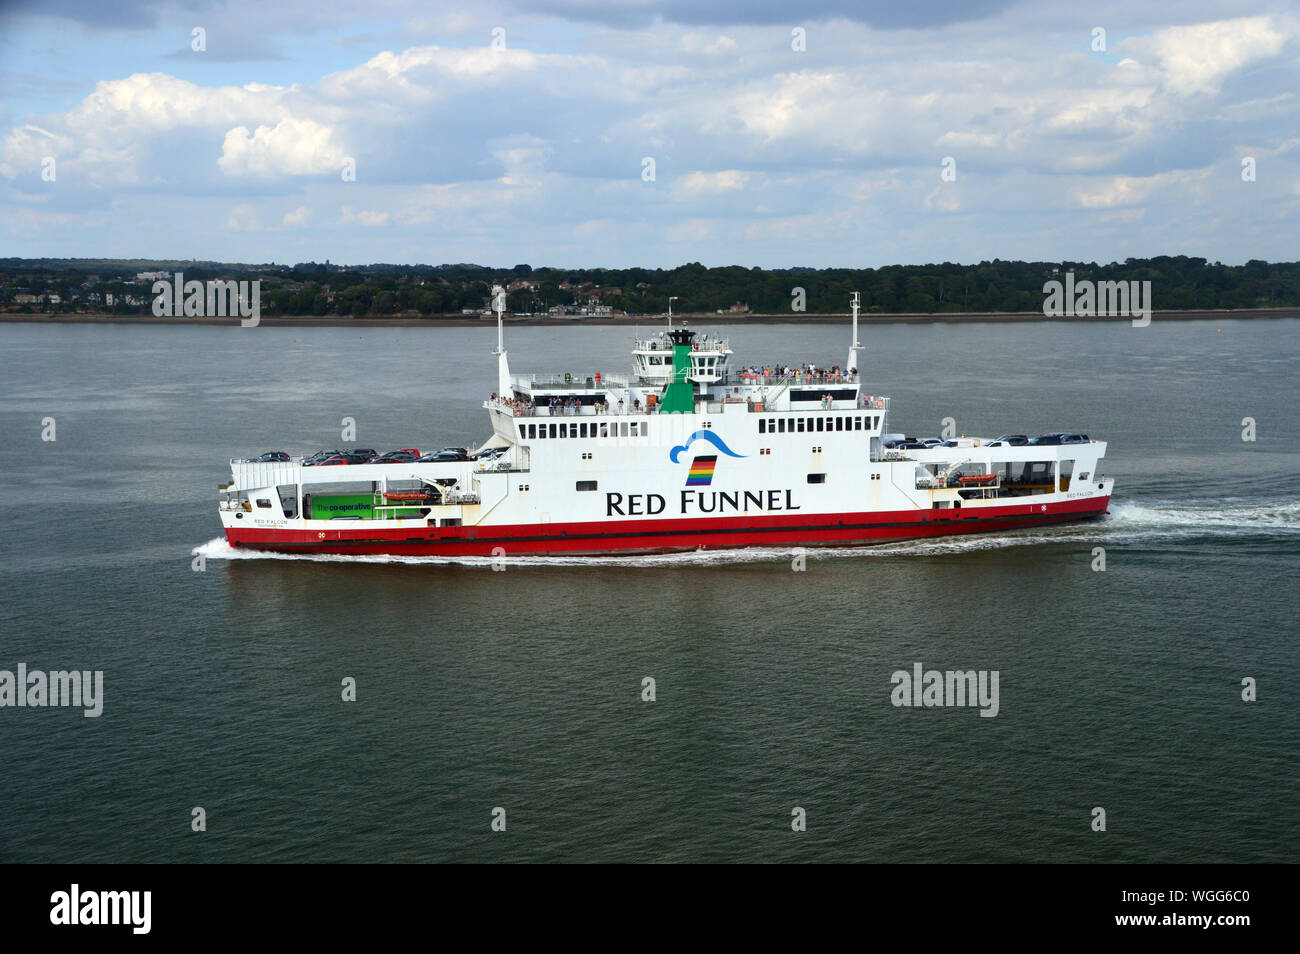 The Red Falcon Passenger and Car Ferry owned by the Red Funnel Ferry Company in the Solent heading for Southampton Harbour, Hampshire, England, UK. Stock Photo